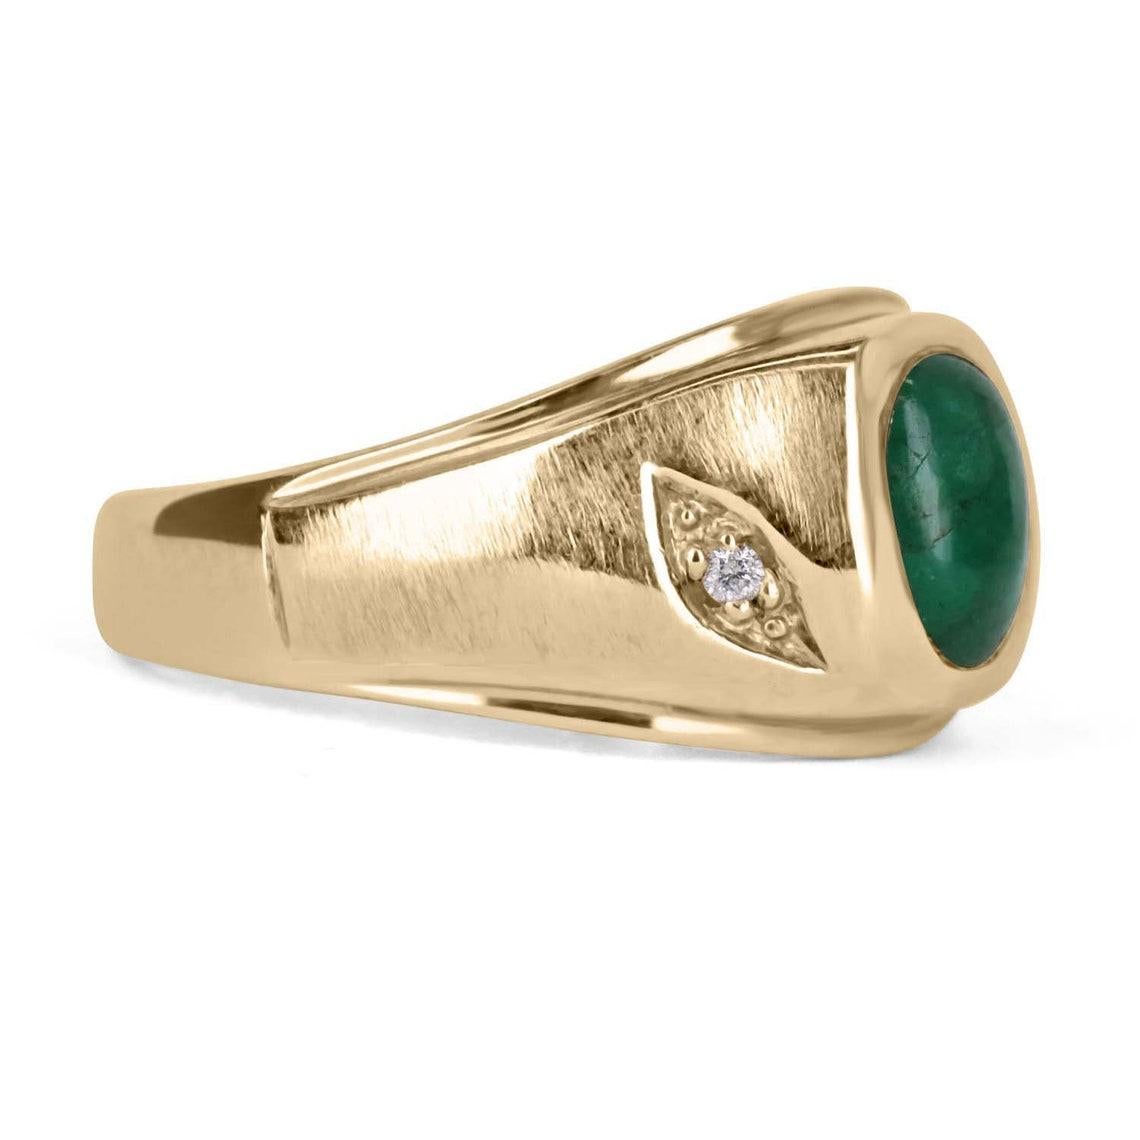 A beautiful three-stone, natural emerald cabochon, and diamond ring. The center stone cabochon has a full 1.36-carats, with a dark green color and very good luster. Accenting the cabochon are two petite brilliant round diamonds. This one-of-a-kind